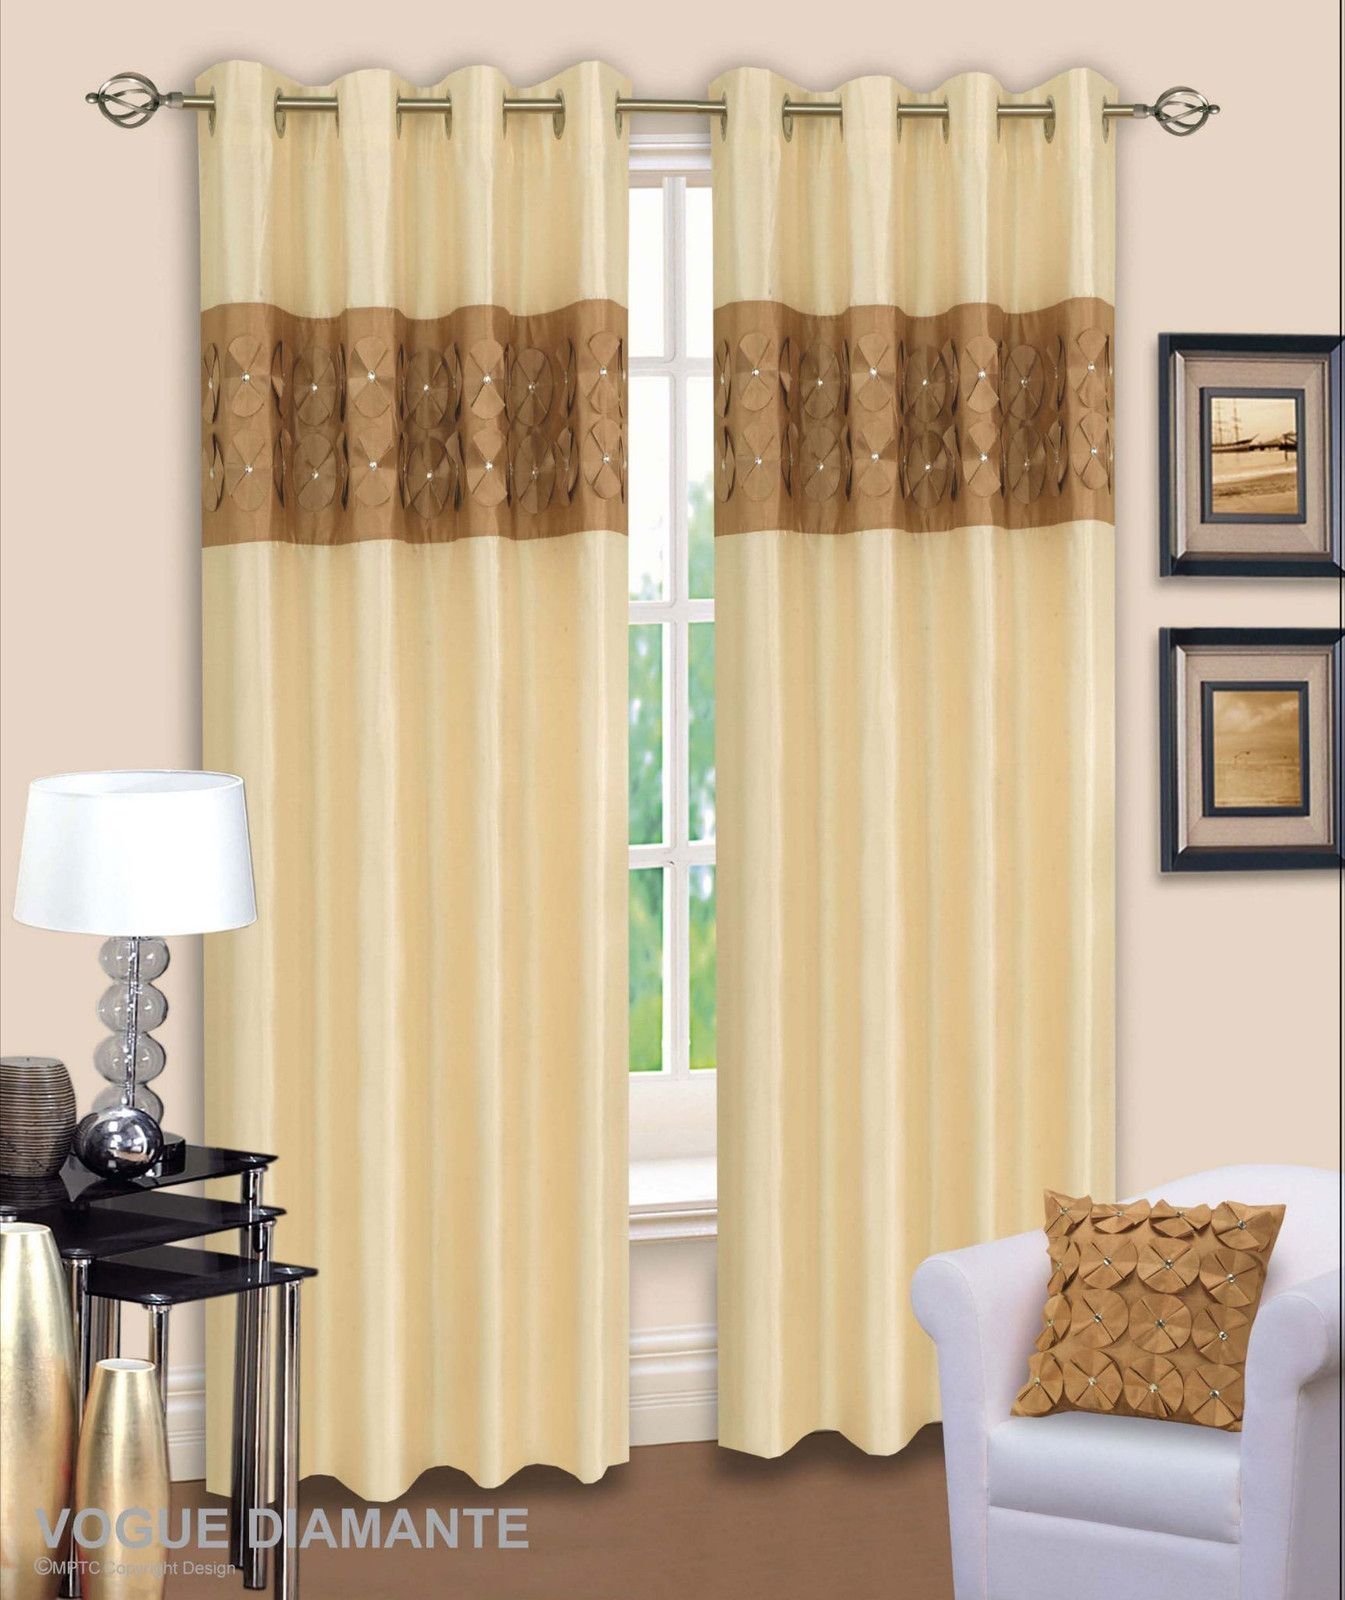 3d Diamante Ringtop Eyelet Lined Curtains Faux Silk Beige Latte Inside Beige Lined Curtains (View 7 of 15)